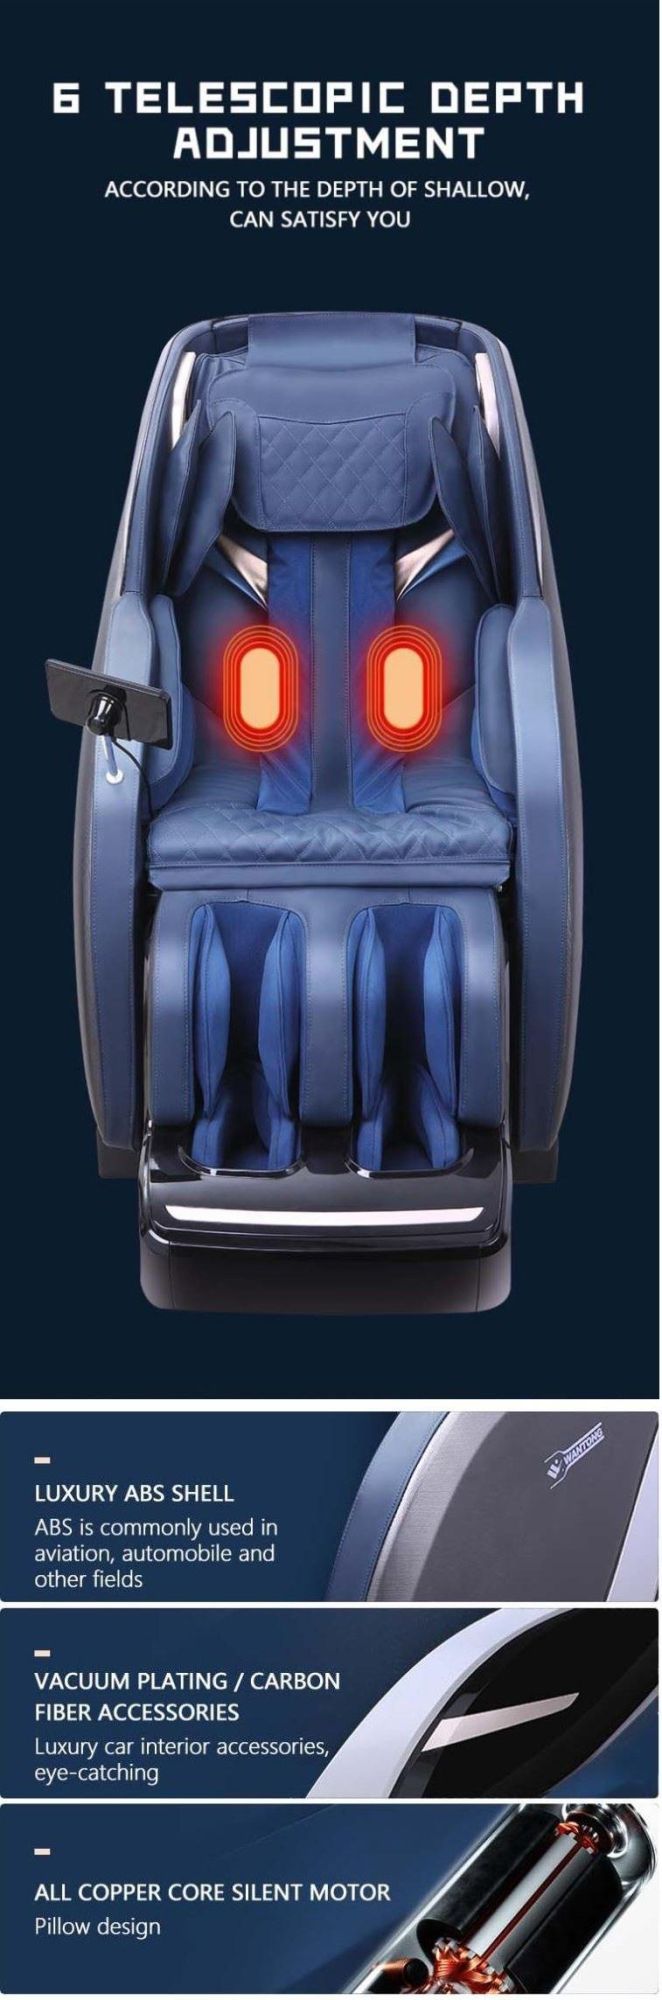 Full Body Care Massage Chair 4D Zero Gravity Massage The Whole Body to Relax